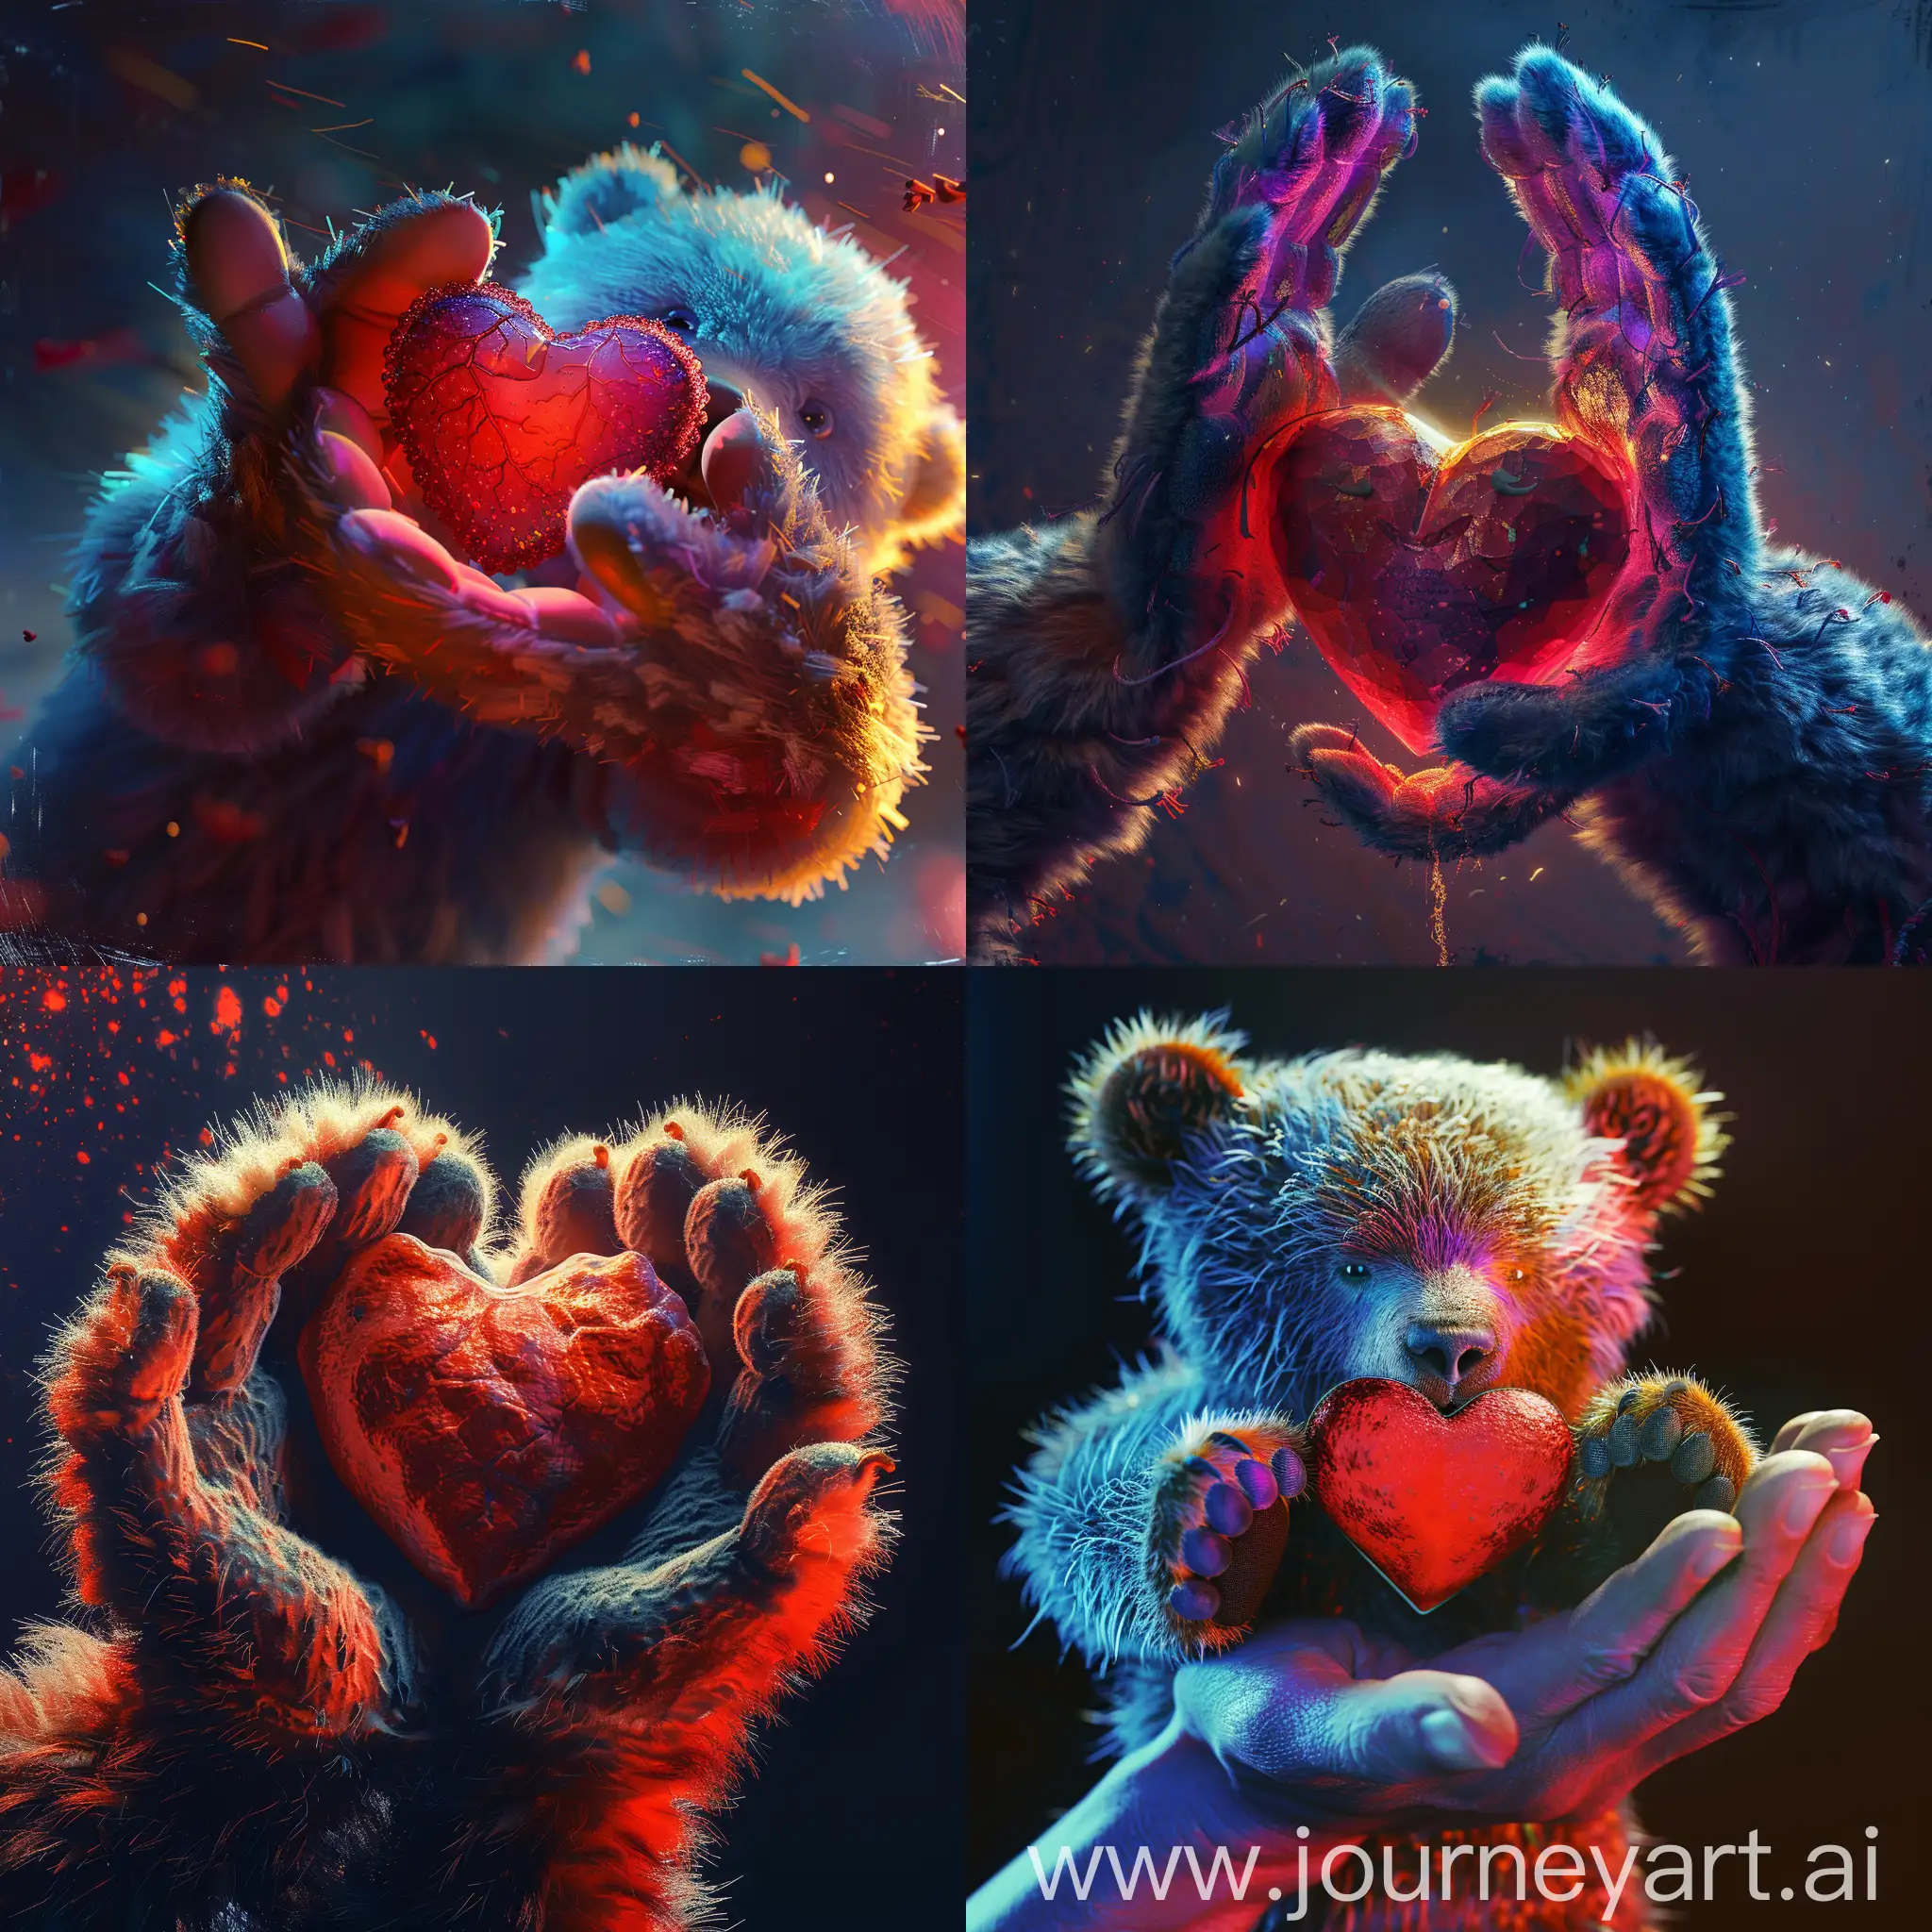 Valentines-Day-Teddy-Bear-Holding-Heart-in-Professional-4K-CGI-Photo